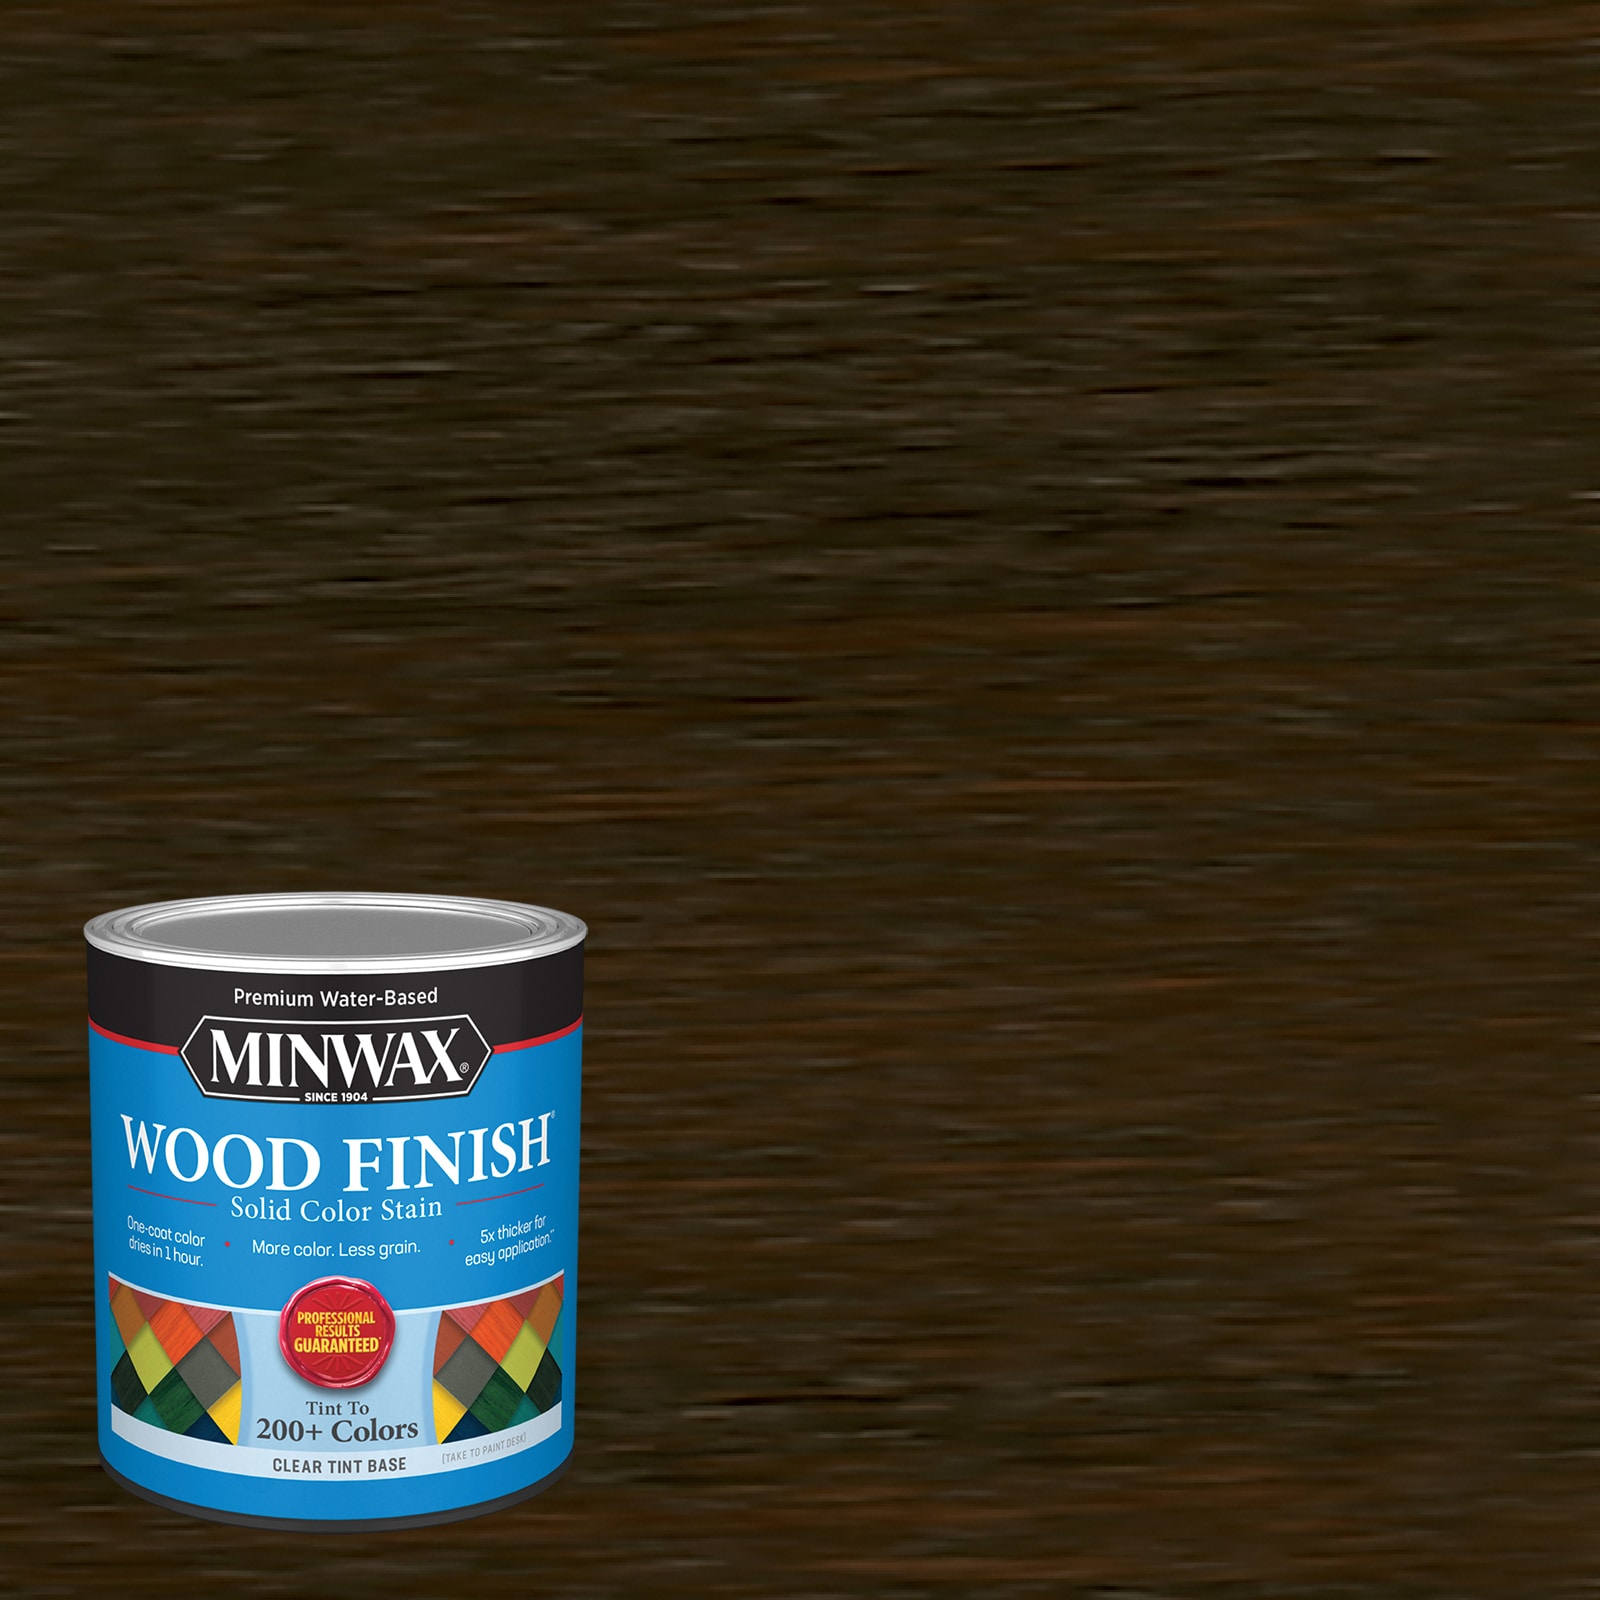 Water-Based department at Wood Minwax Sumatra Solid Mw1116 Mocha in (1-Quart) the Interior Finish Stain Interior Stains